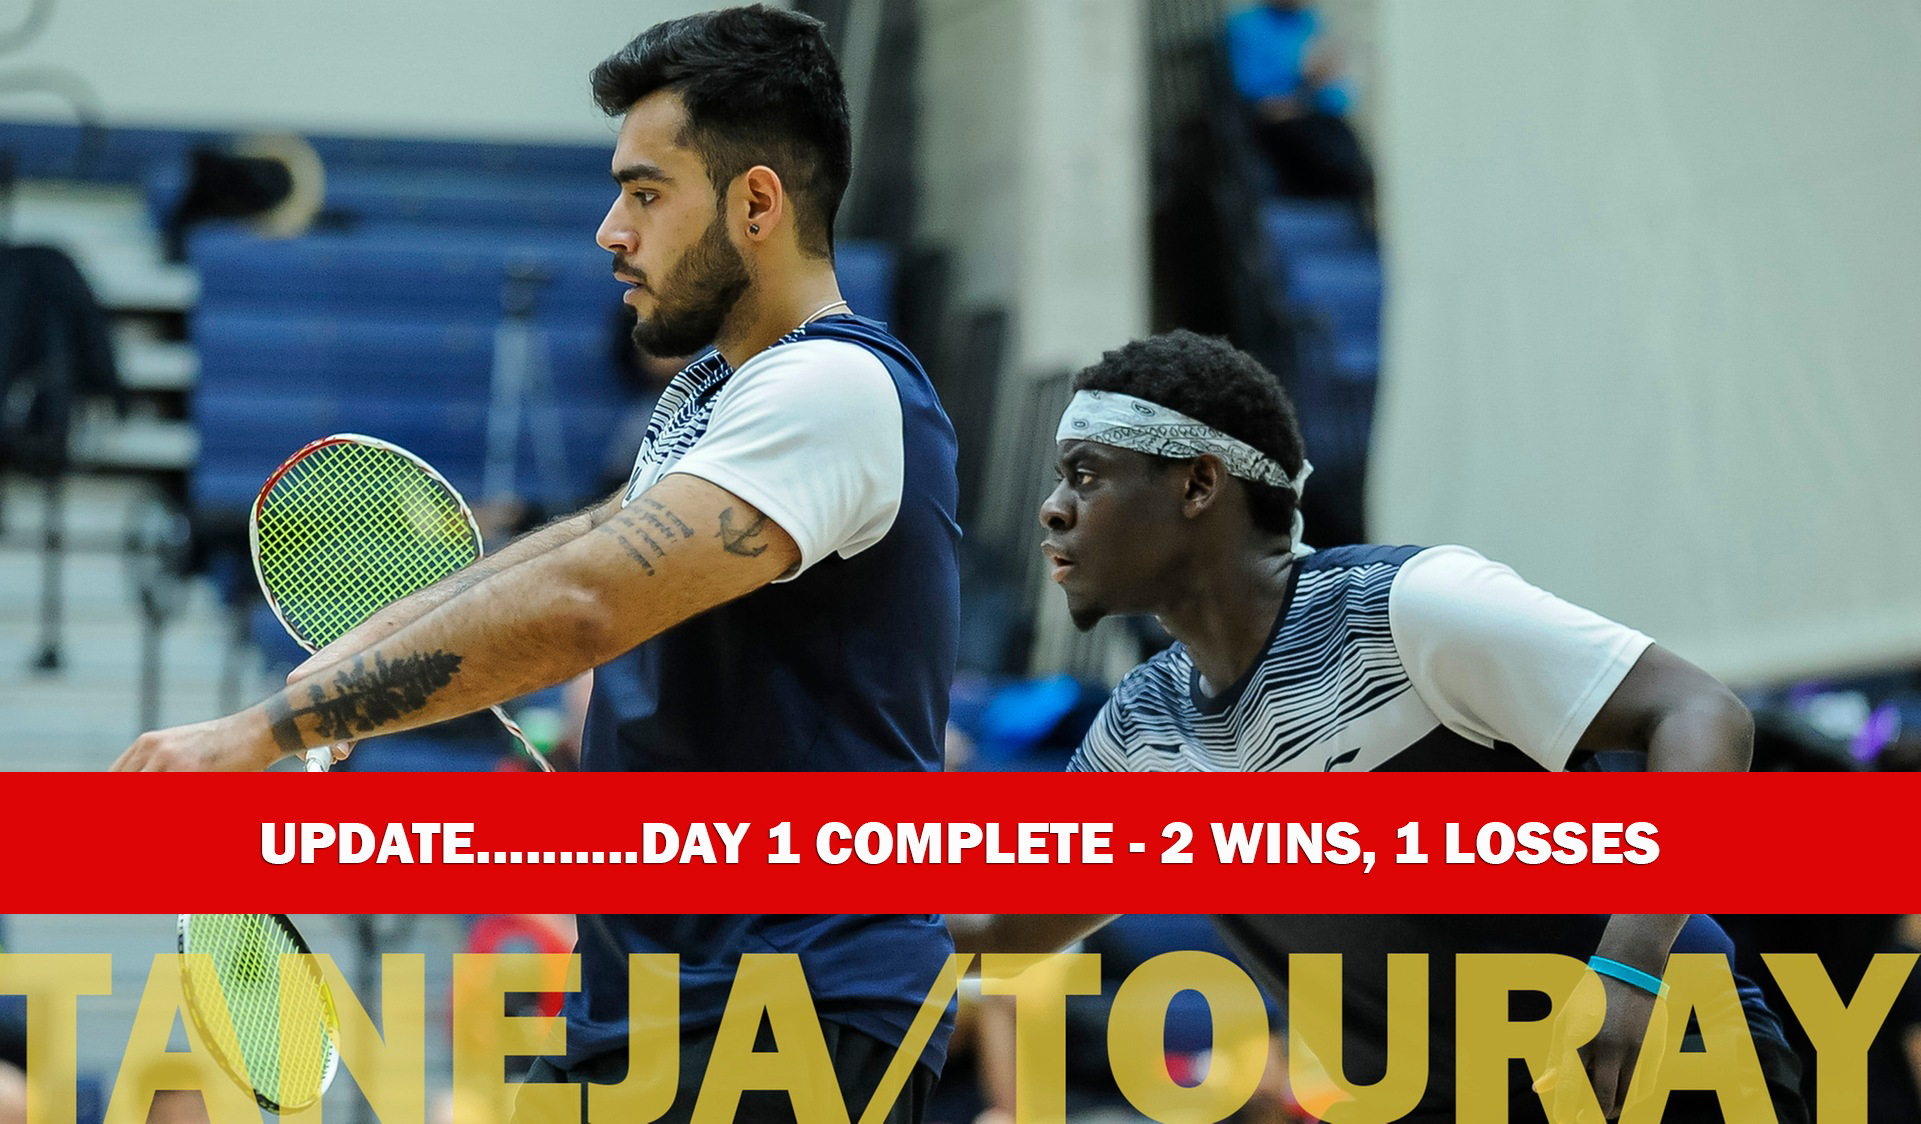 TANEJA AND TOURAY HEAD EAST IN SEARCH OF CCAA BADMINTON GOLD